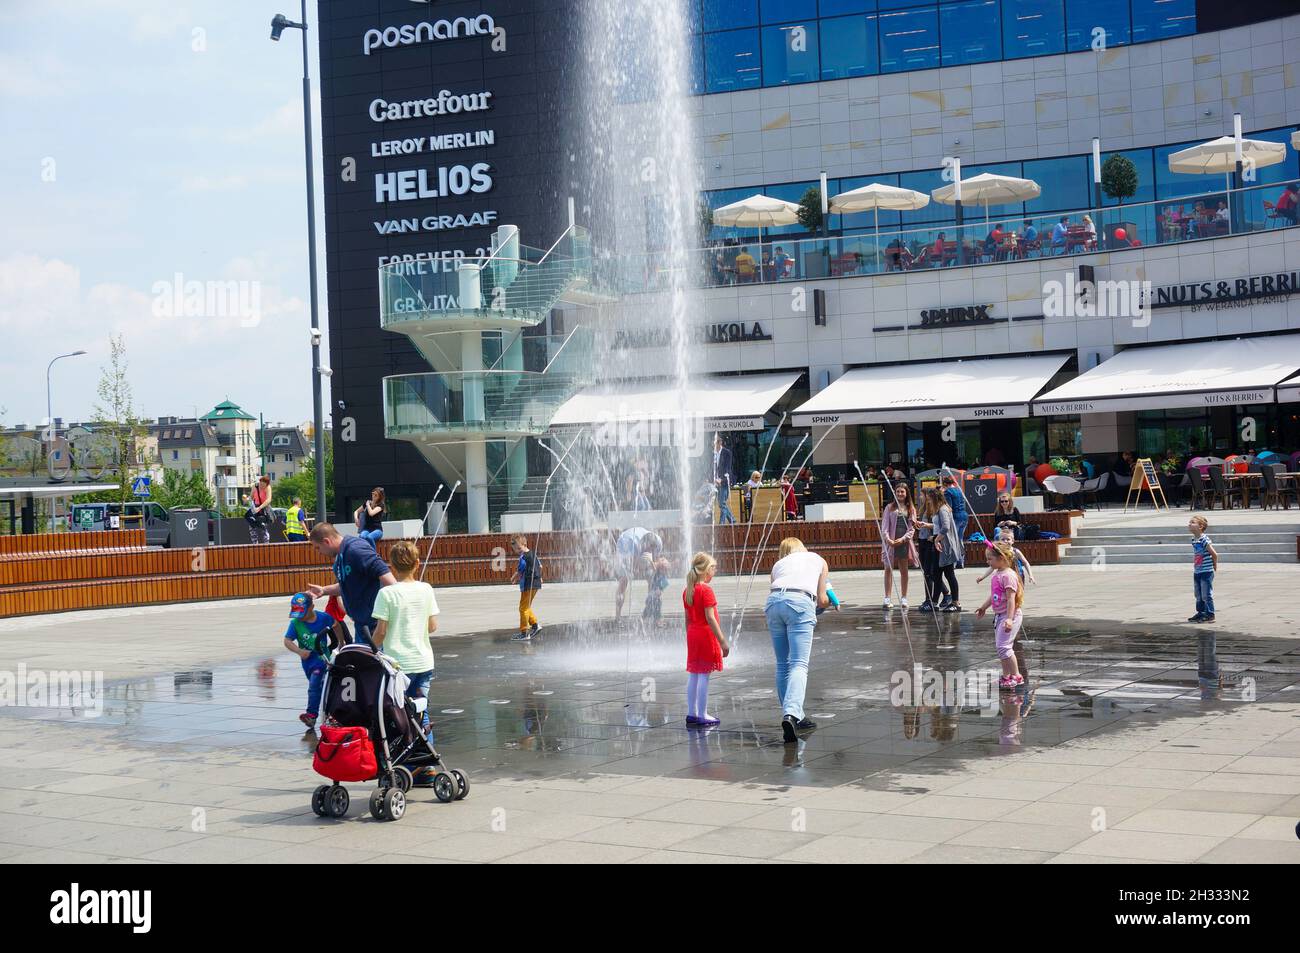 POZNAN, POLAND - May 14, 2017: People having fun around a water fountain in  front of the Posnania shopping mall on a sunny day Stock Photo - Alamy